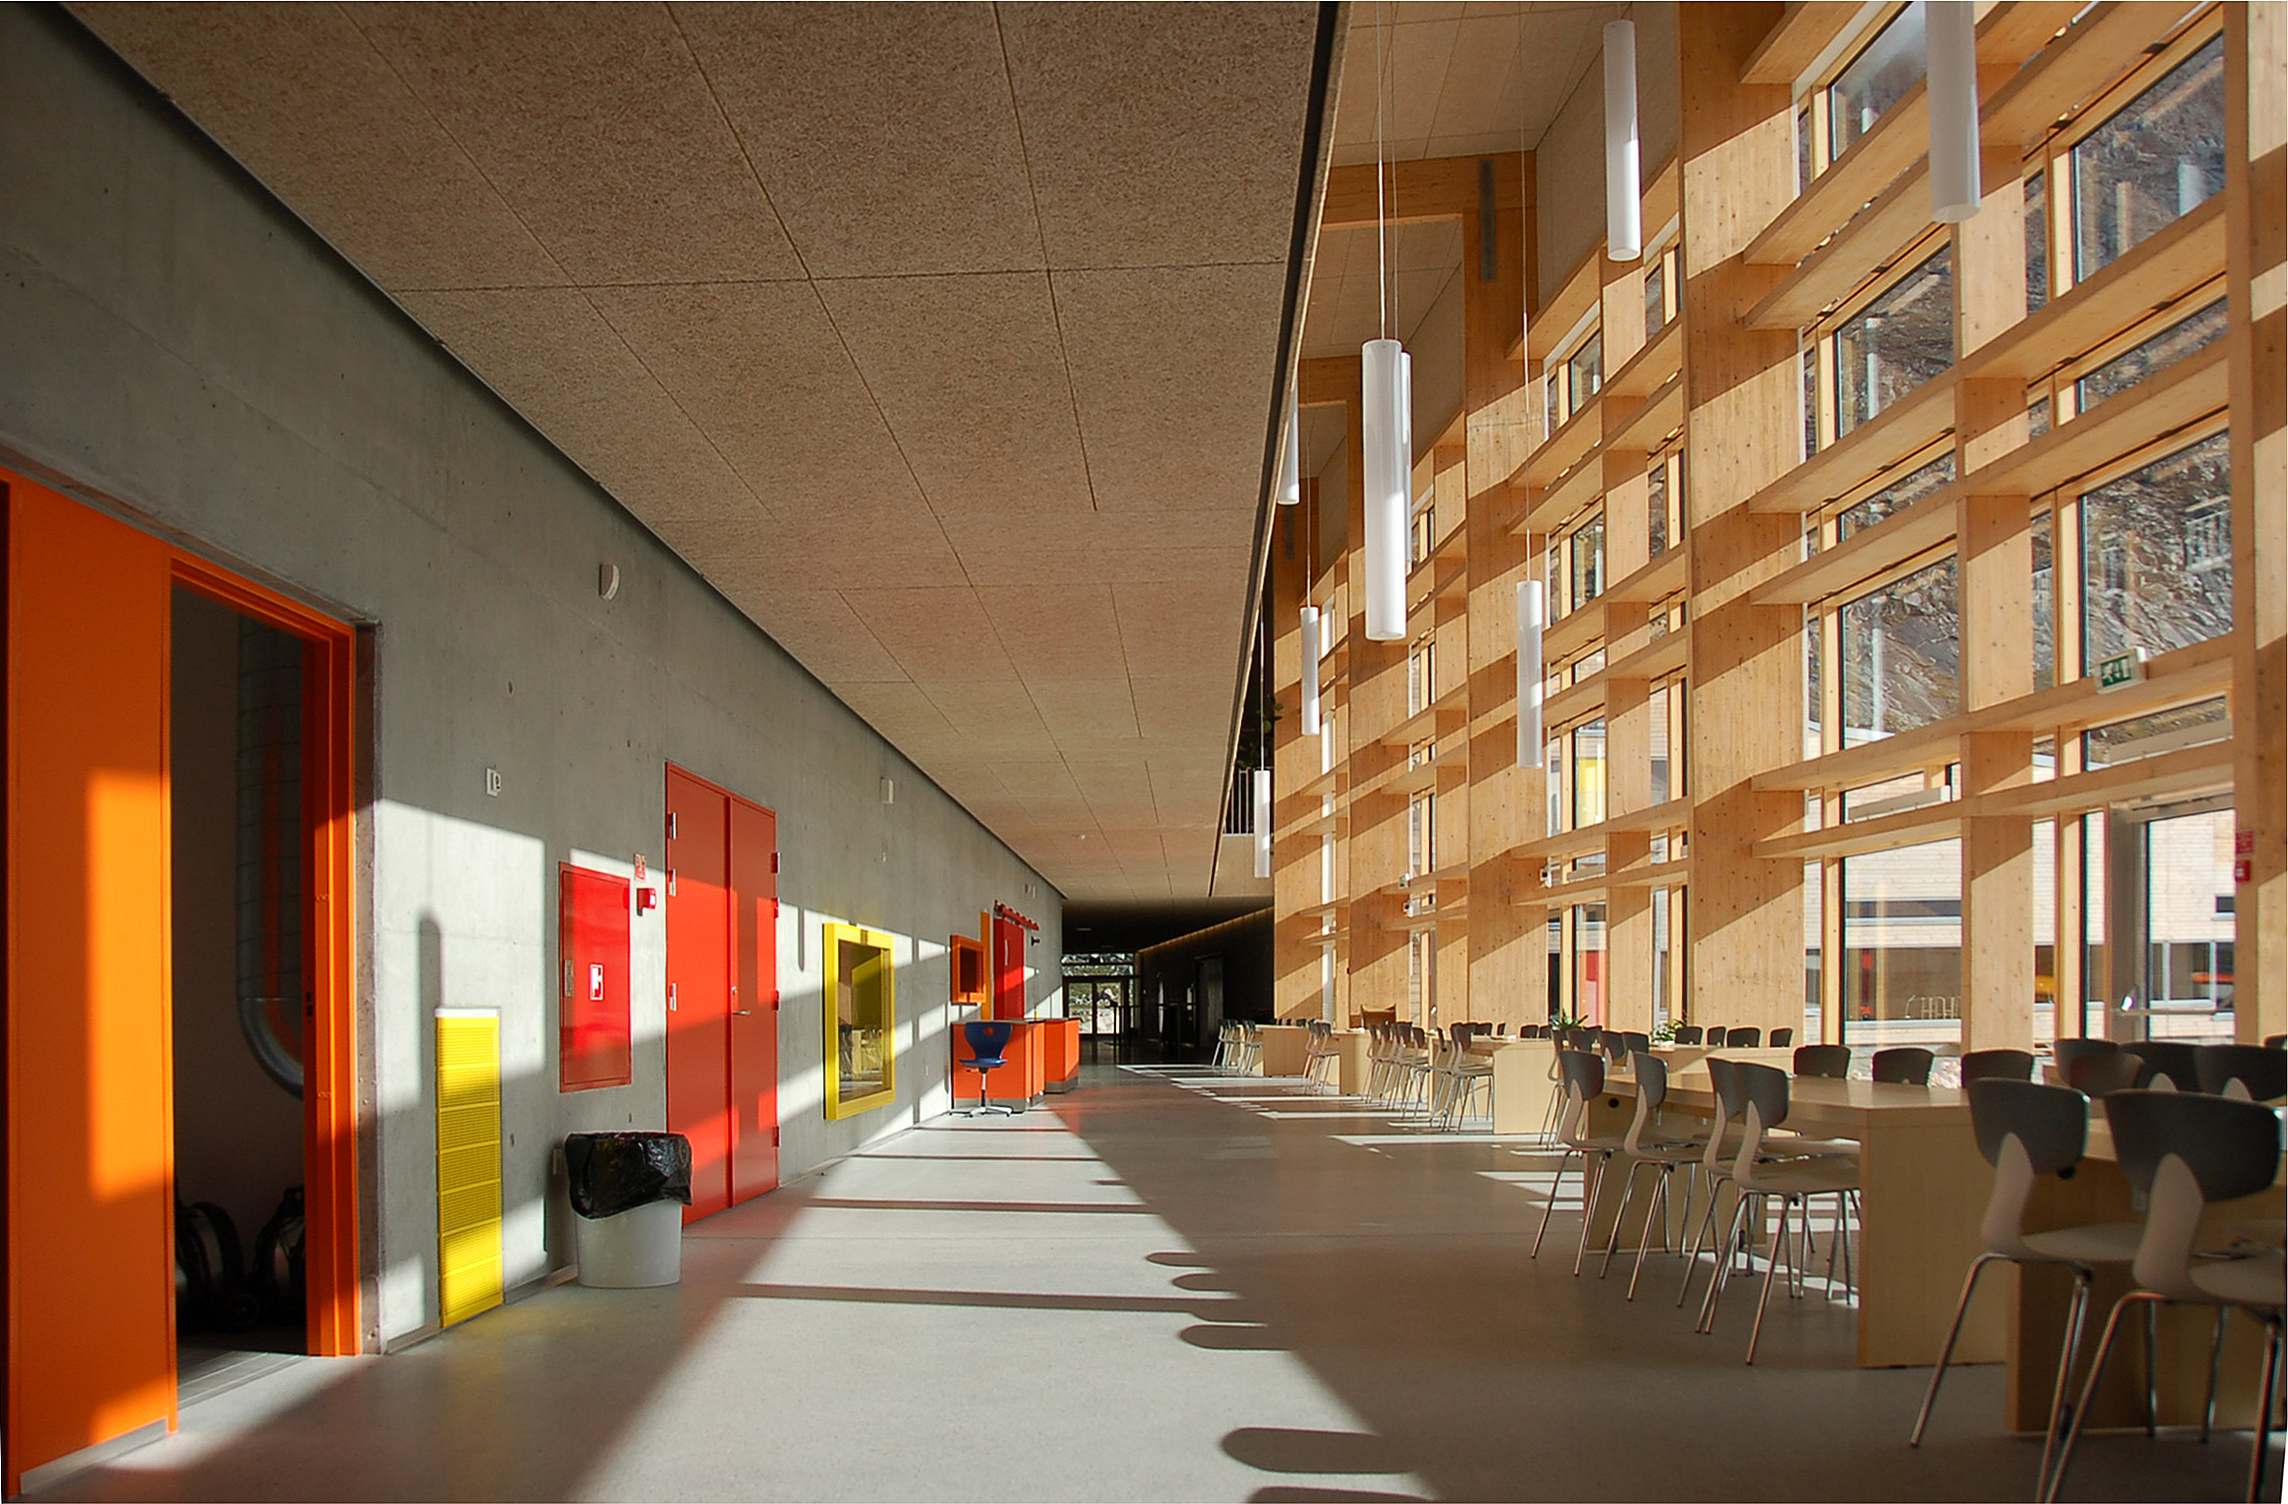 Architecture that promotes a good learning environment